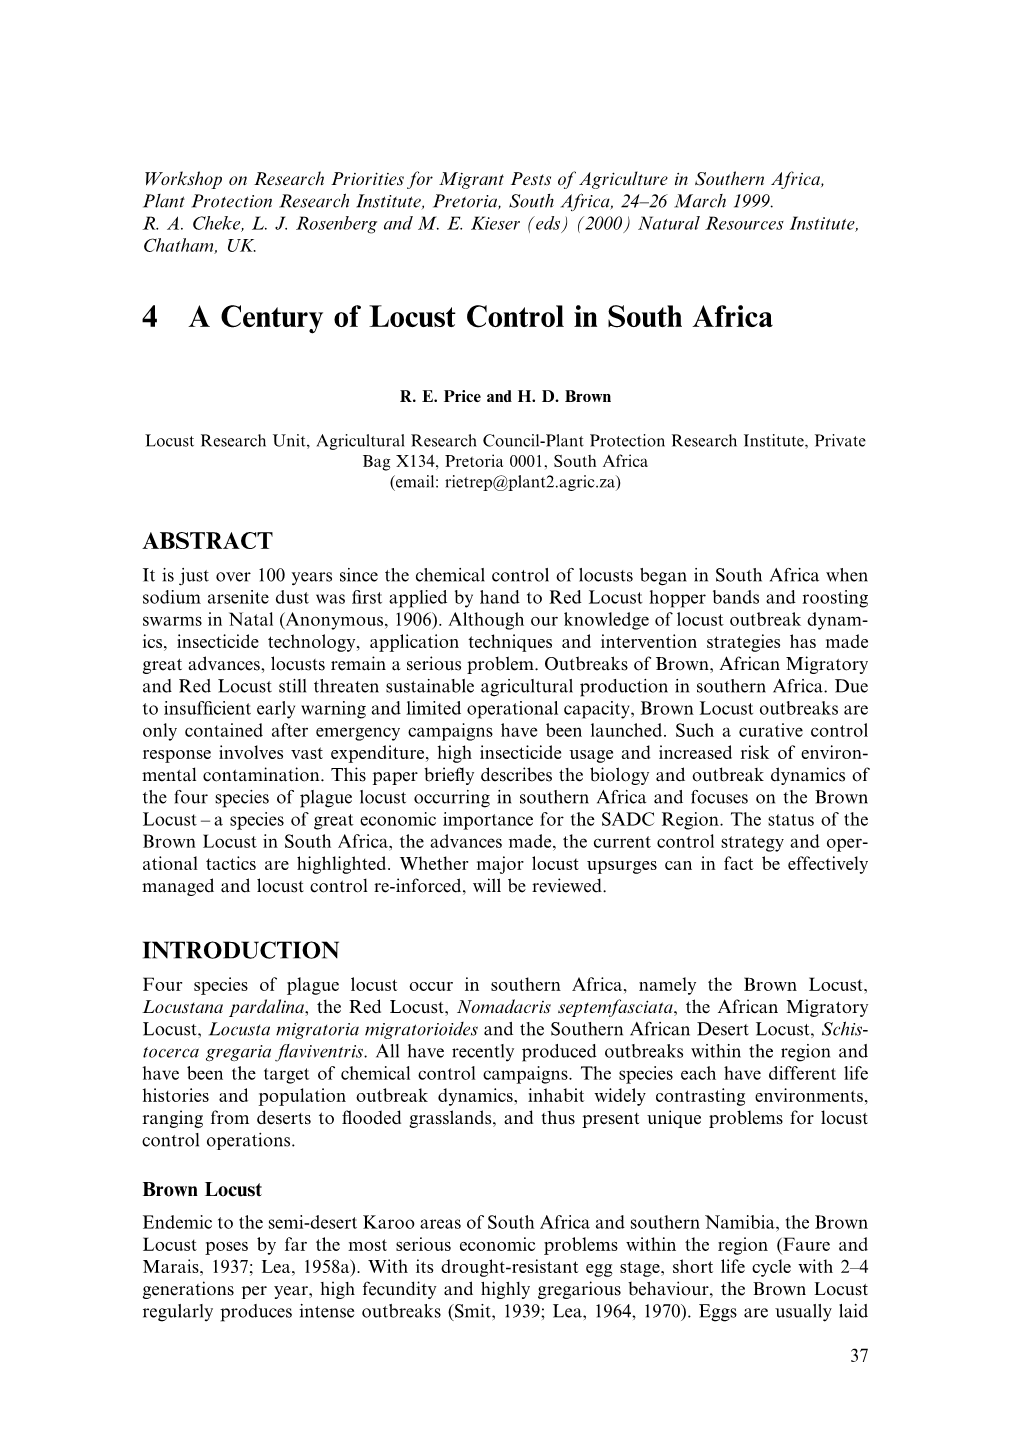 4 a Century of Locust Control in South Africa